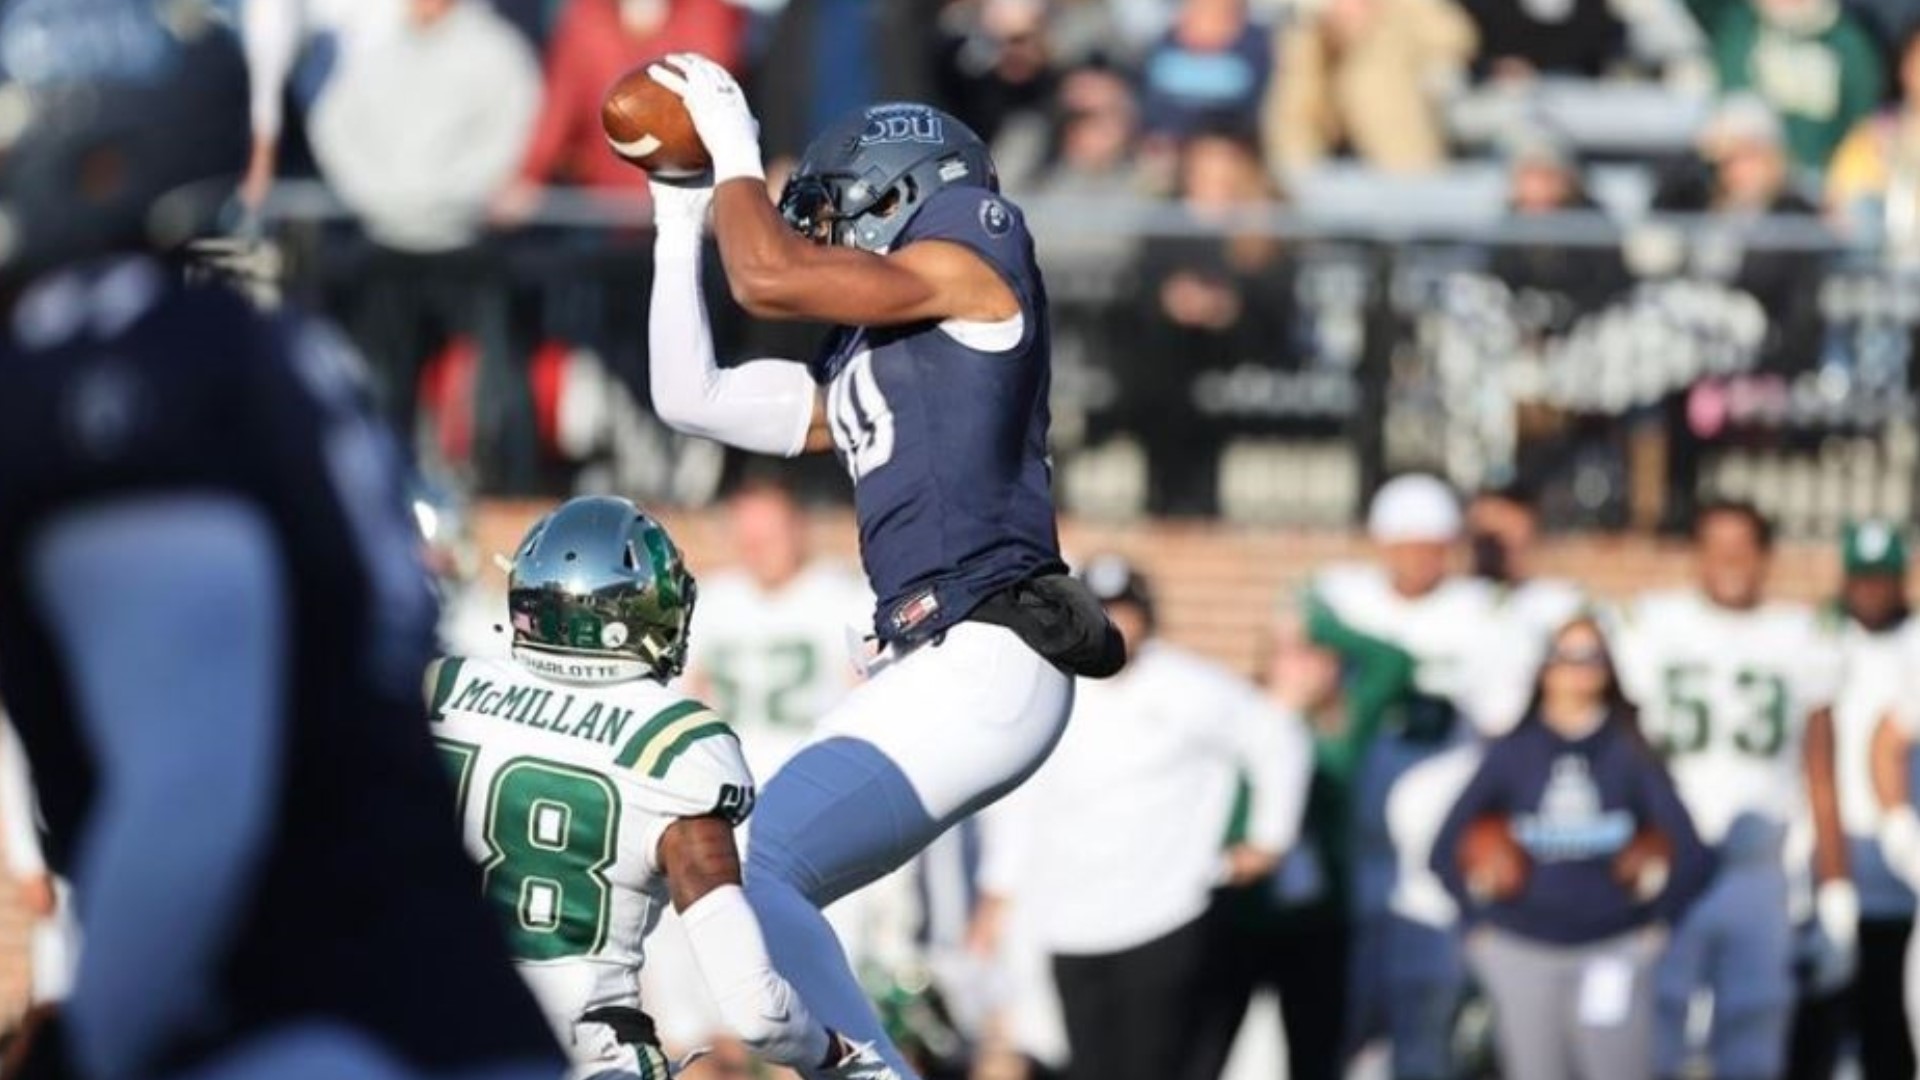 Old Dominion’s last appearance in a bowl game was in 2016, when the Monarchs defeated Eastern Michigan in the Bahamas Bowl.